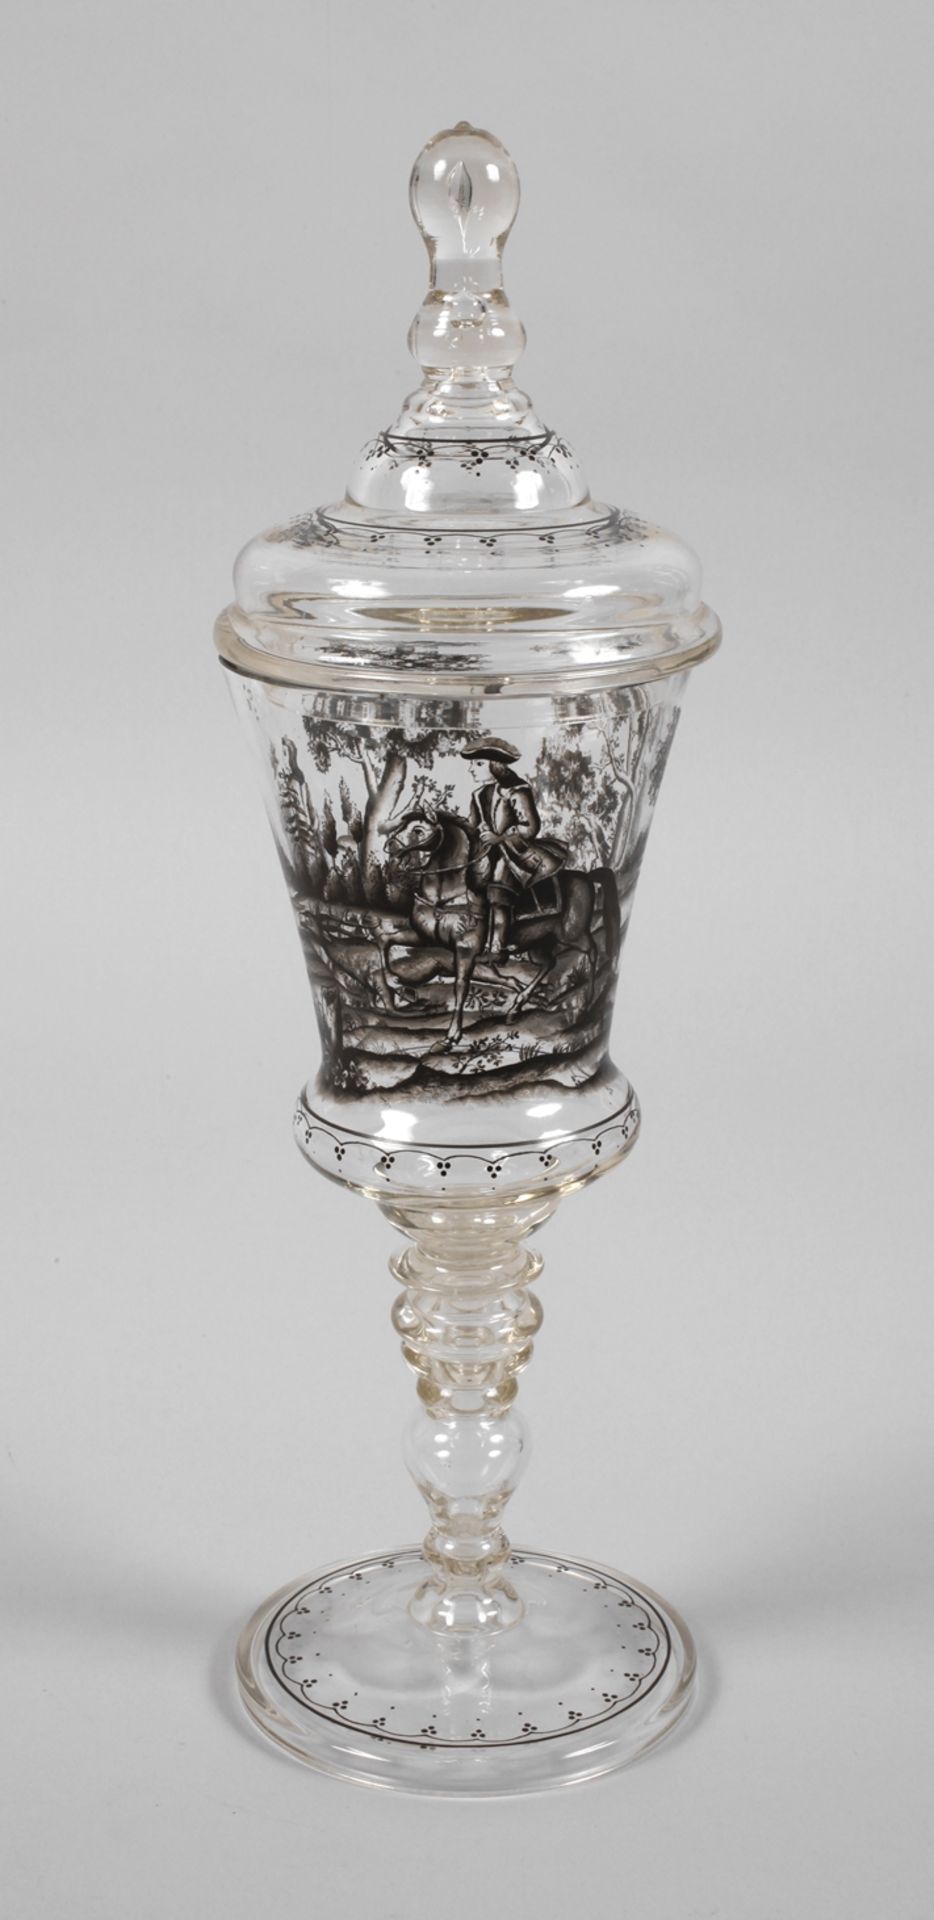 Lidded goblet with black plumb painting